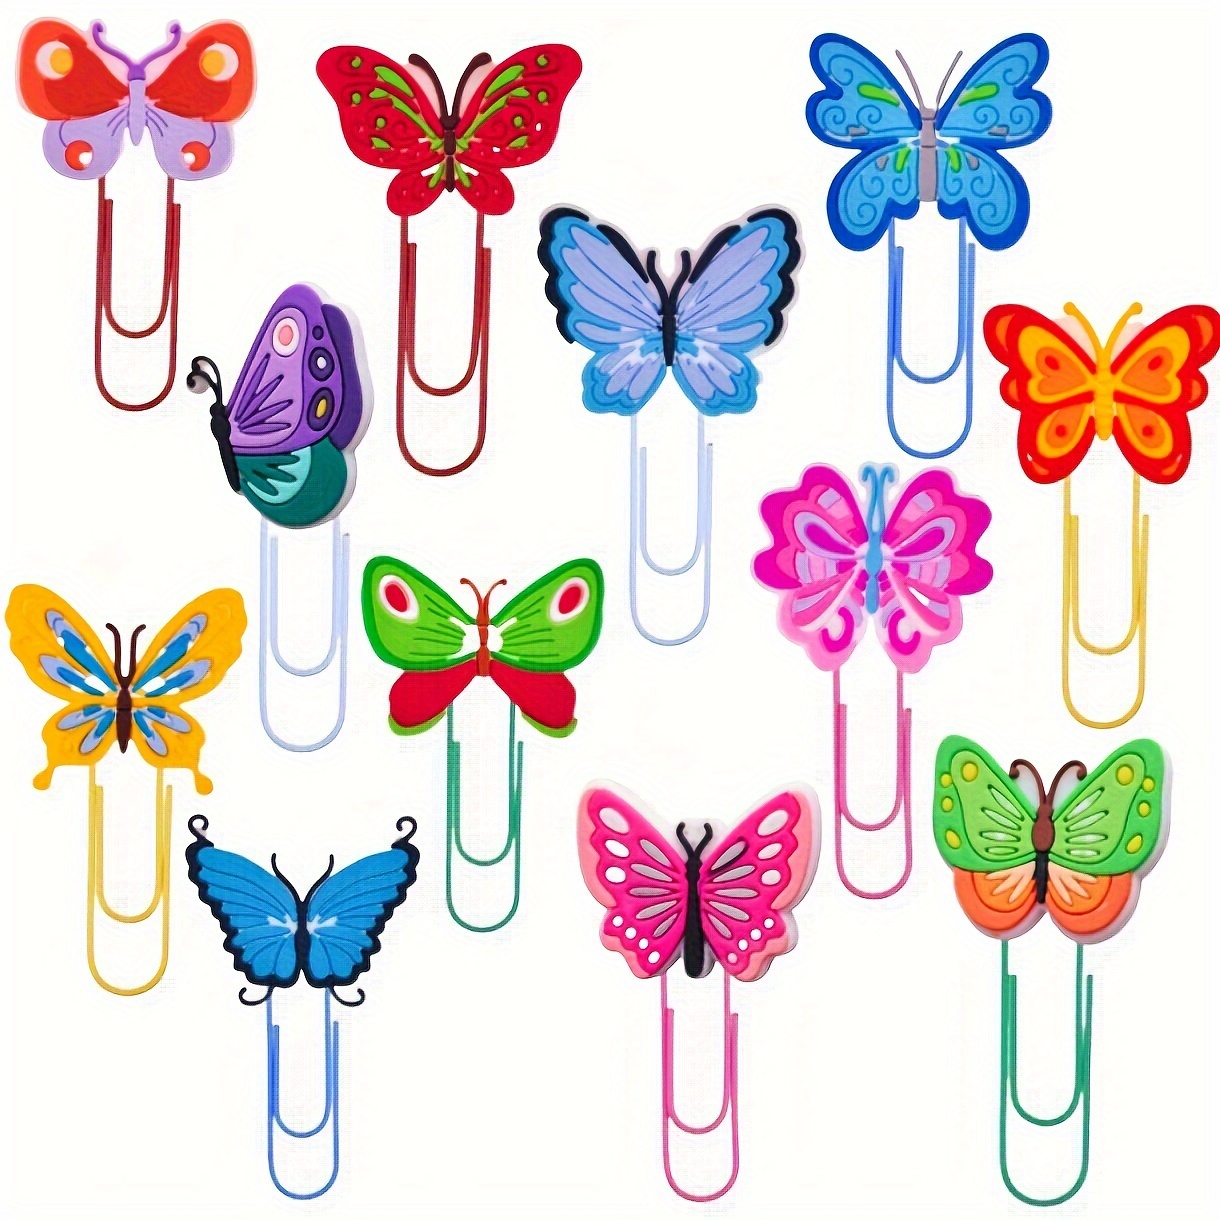 

12pcs Cute Cartoon Butterfly Paper Clips Office Supplies Accessories Bookmark Pliers Desk Stationery School Books File Page Markers Welcome Gift